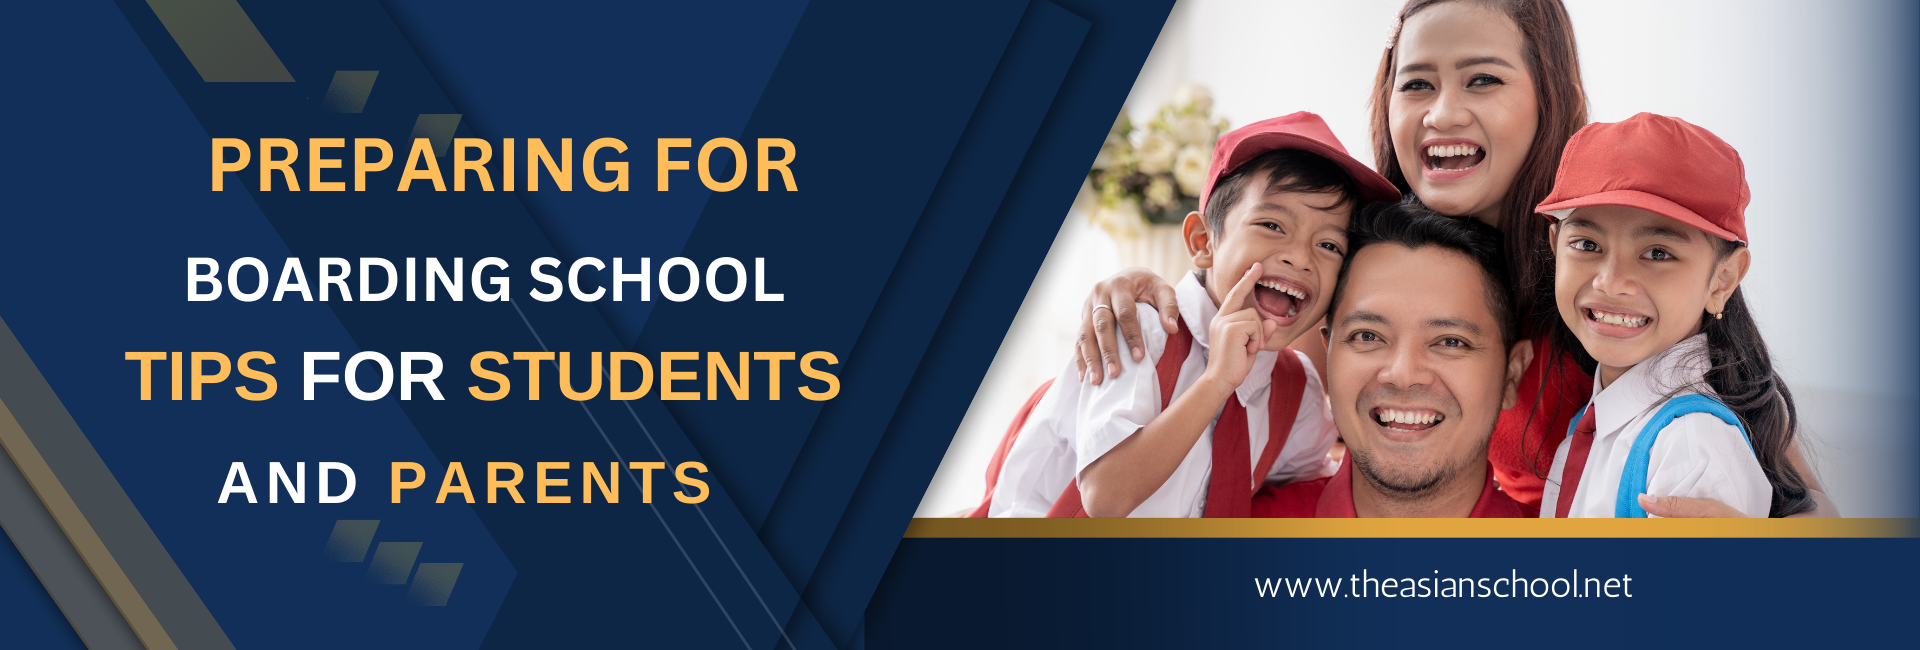 Preparing For Boarding School Tips For Students And Parents